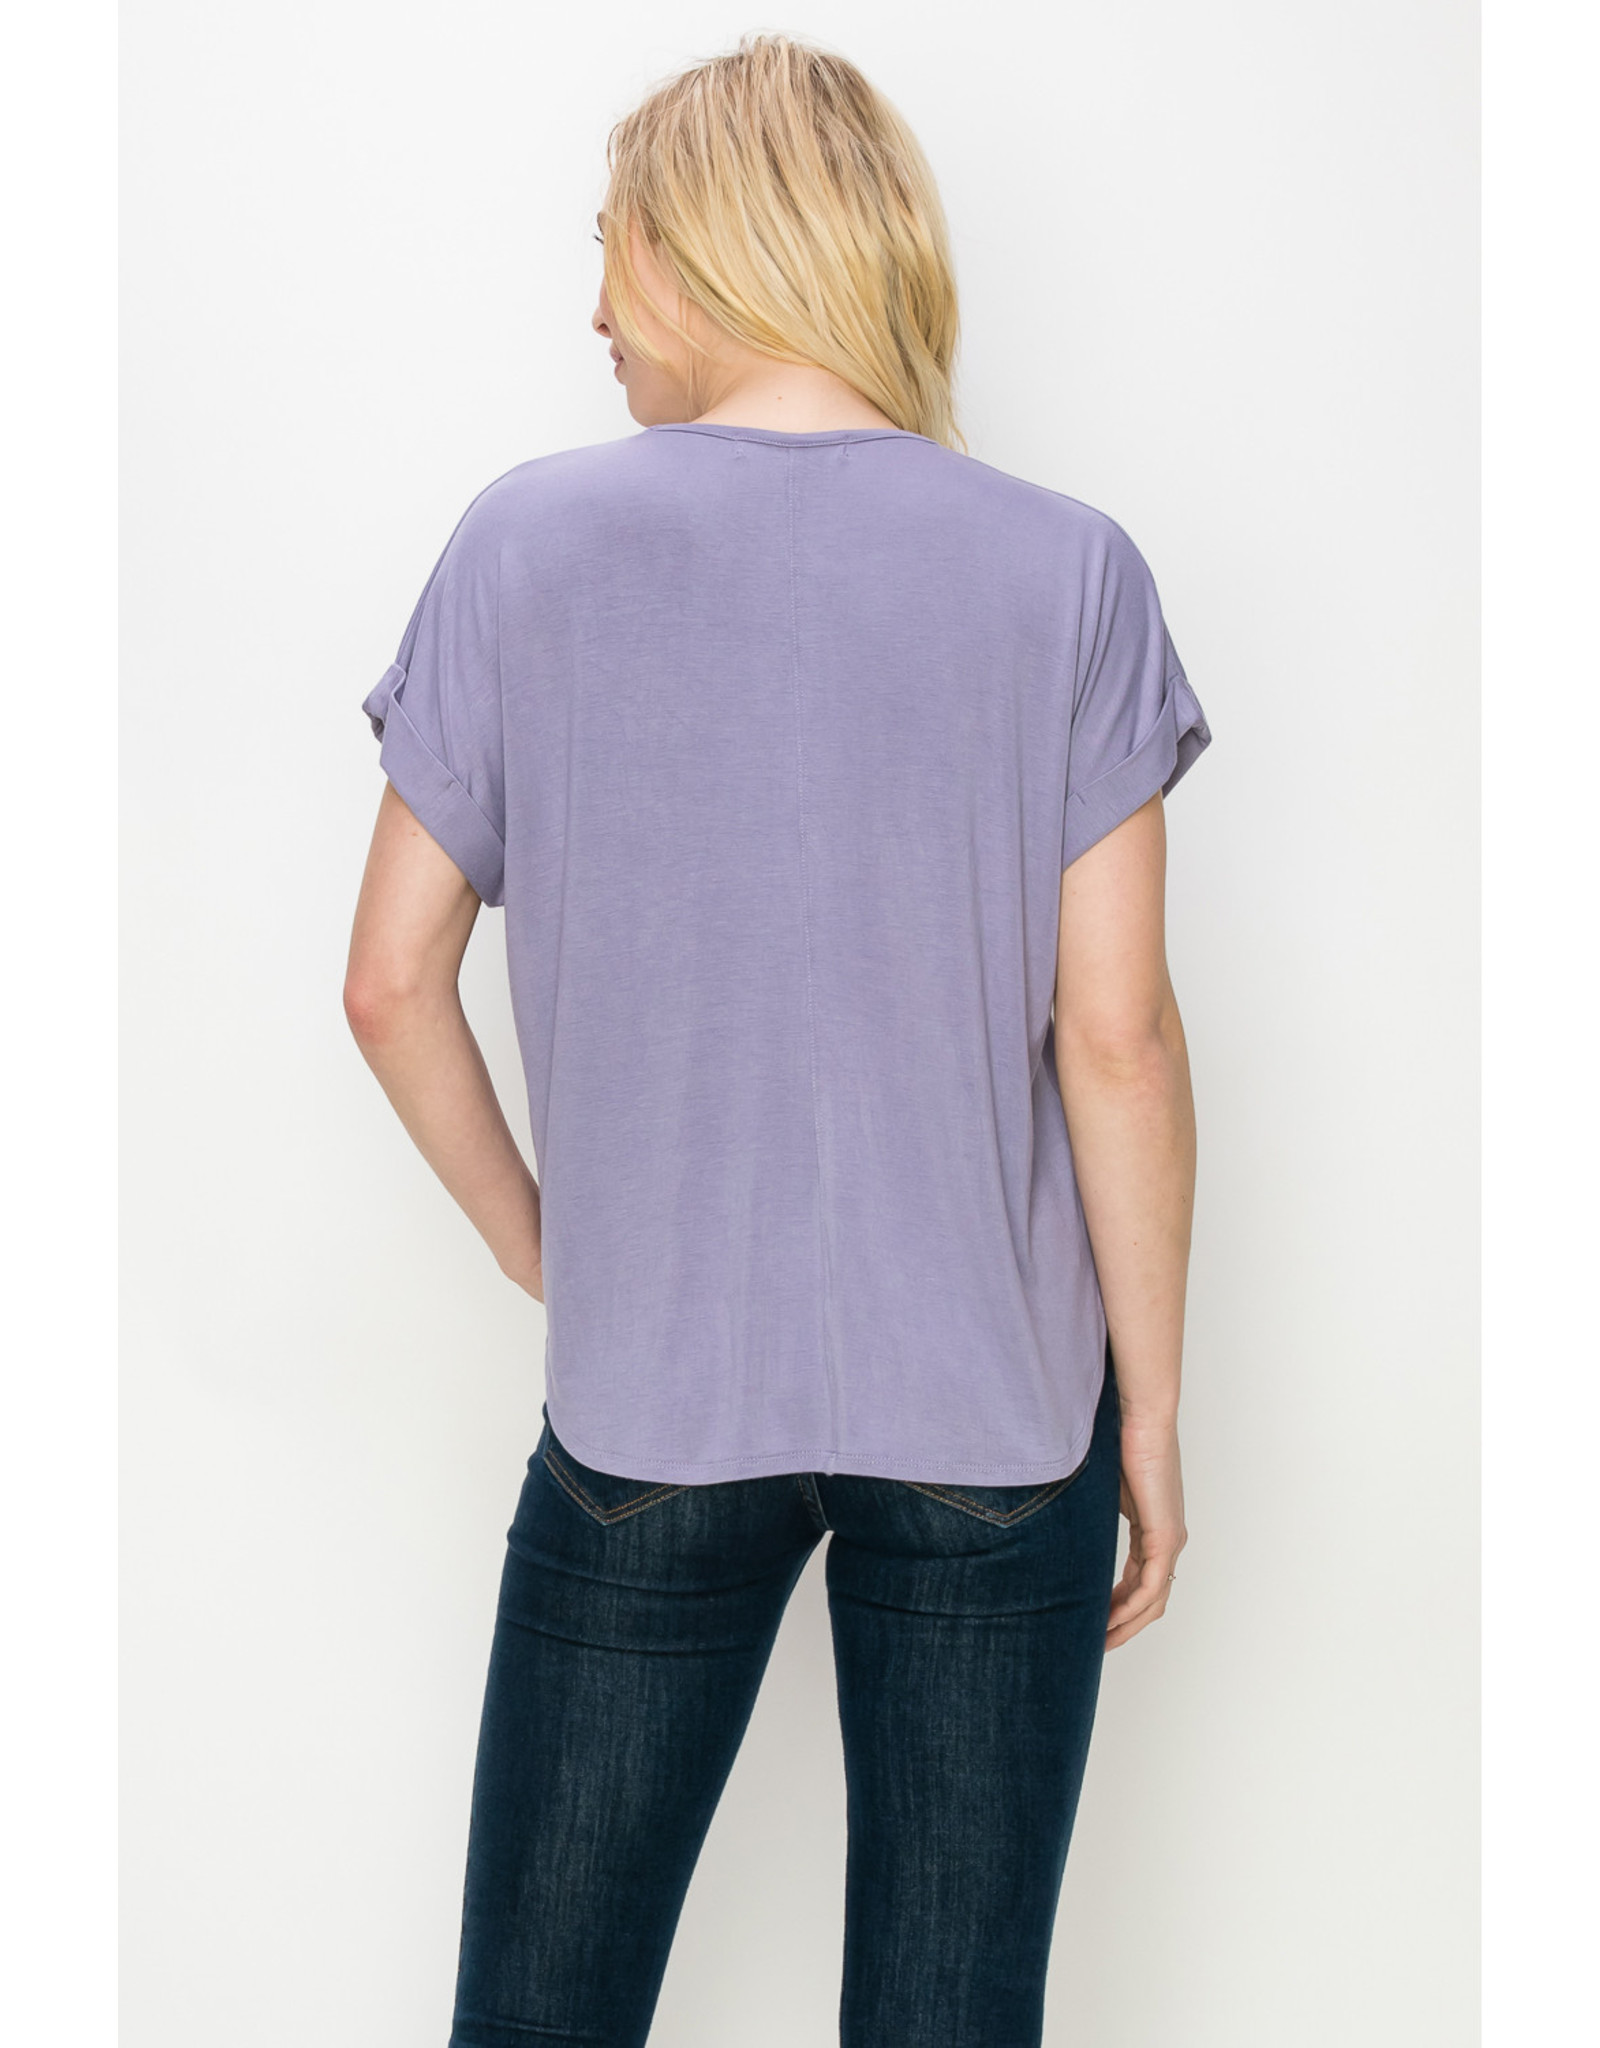 Coin1804 V Neck Rolled Sleeve Top